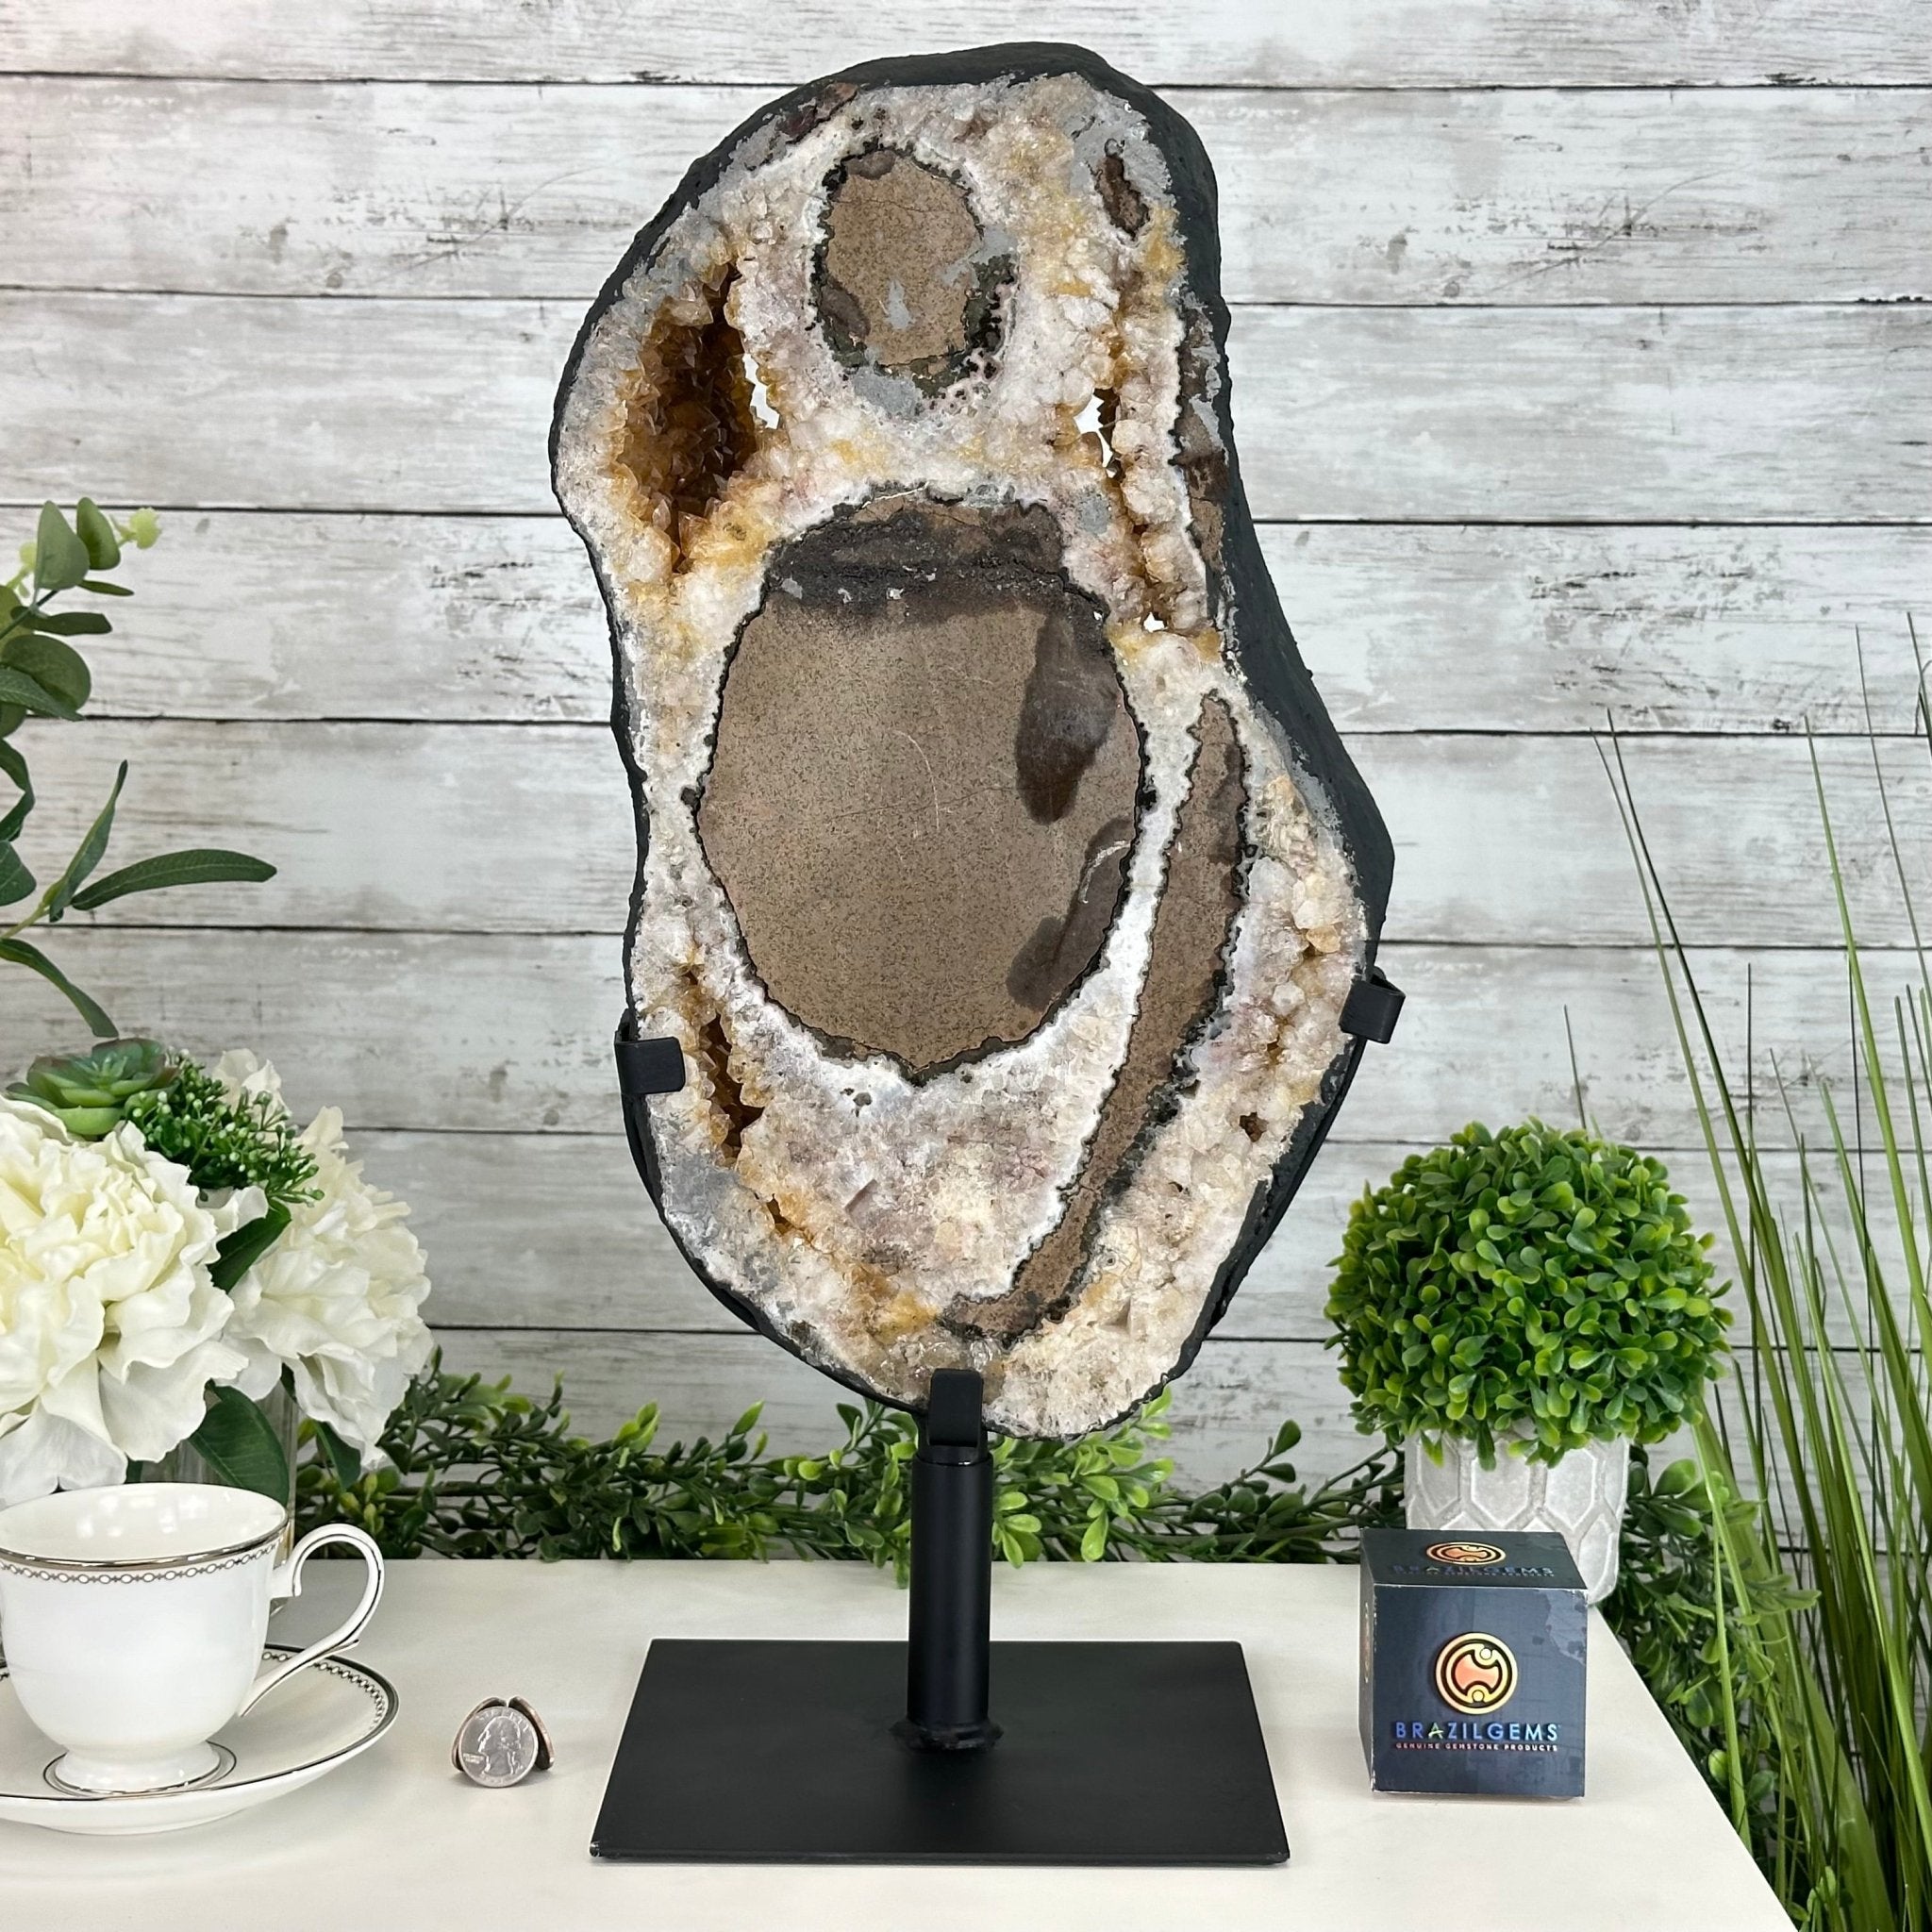 Citrine Portal on a Rotating Stand, 29 lbs & 20.3" tall #5625-0009 by Brazil Gems® - Brazil GemsBrazil GemsCitrine Portal on a Rotating Stand, 29 lbs & 20.3" tall #5625-0009 by Brazil Gems®Portals on Rotating Bases5625-0009